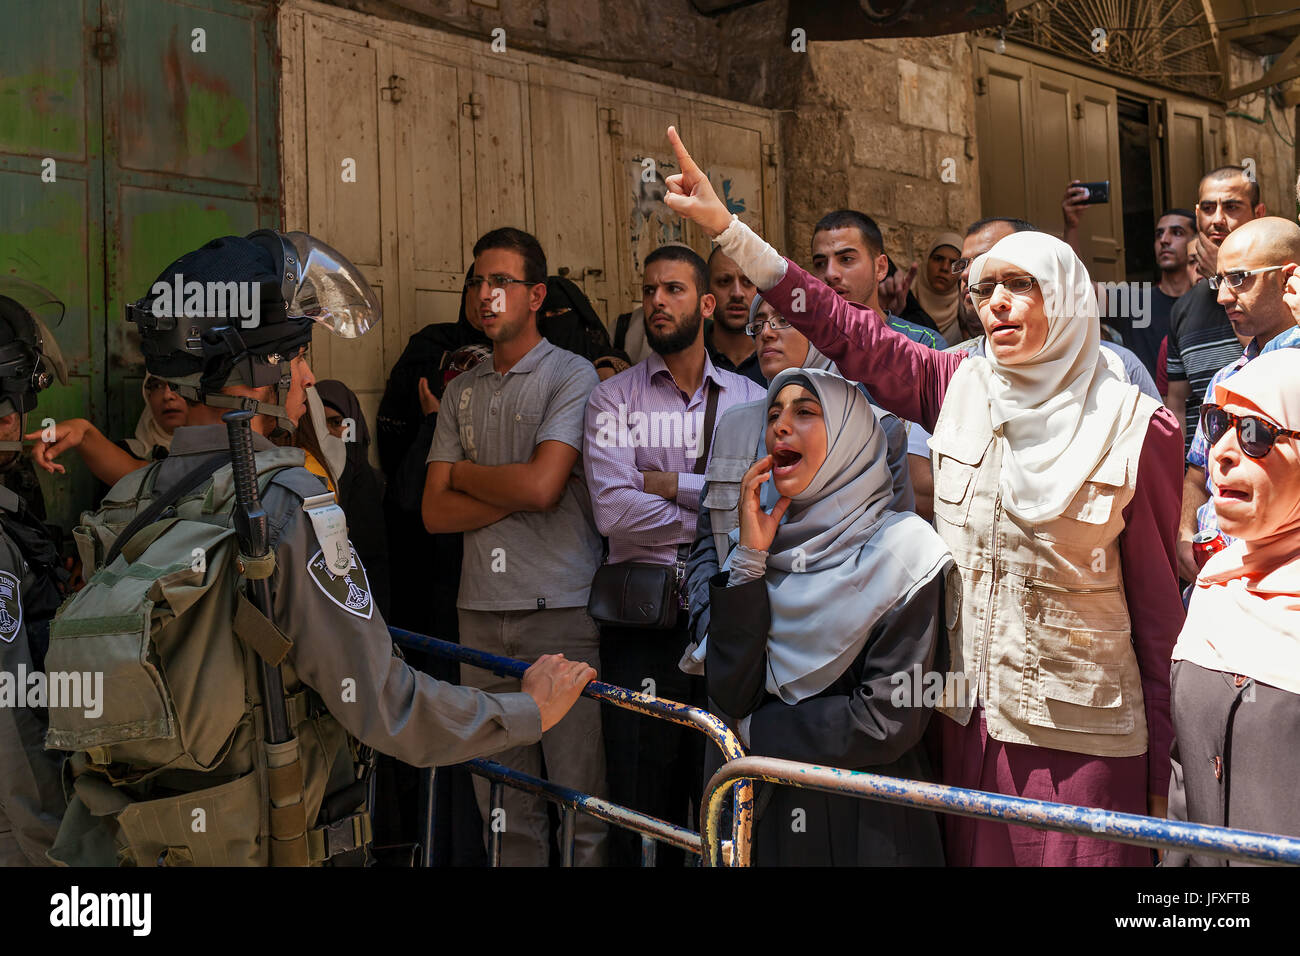 JERUSALEM, ISRAEL - JULY 26, 2015: Palestinians in Old City of Jerusalem protest against ascent of Jews to Temple Mount during Tisha B'Av. Stock Photo